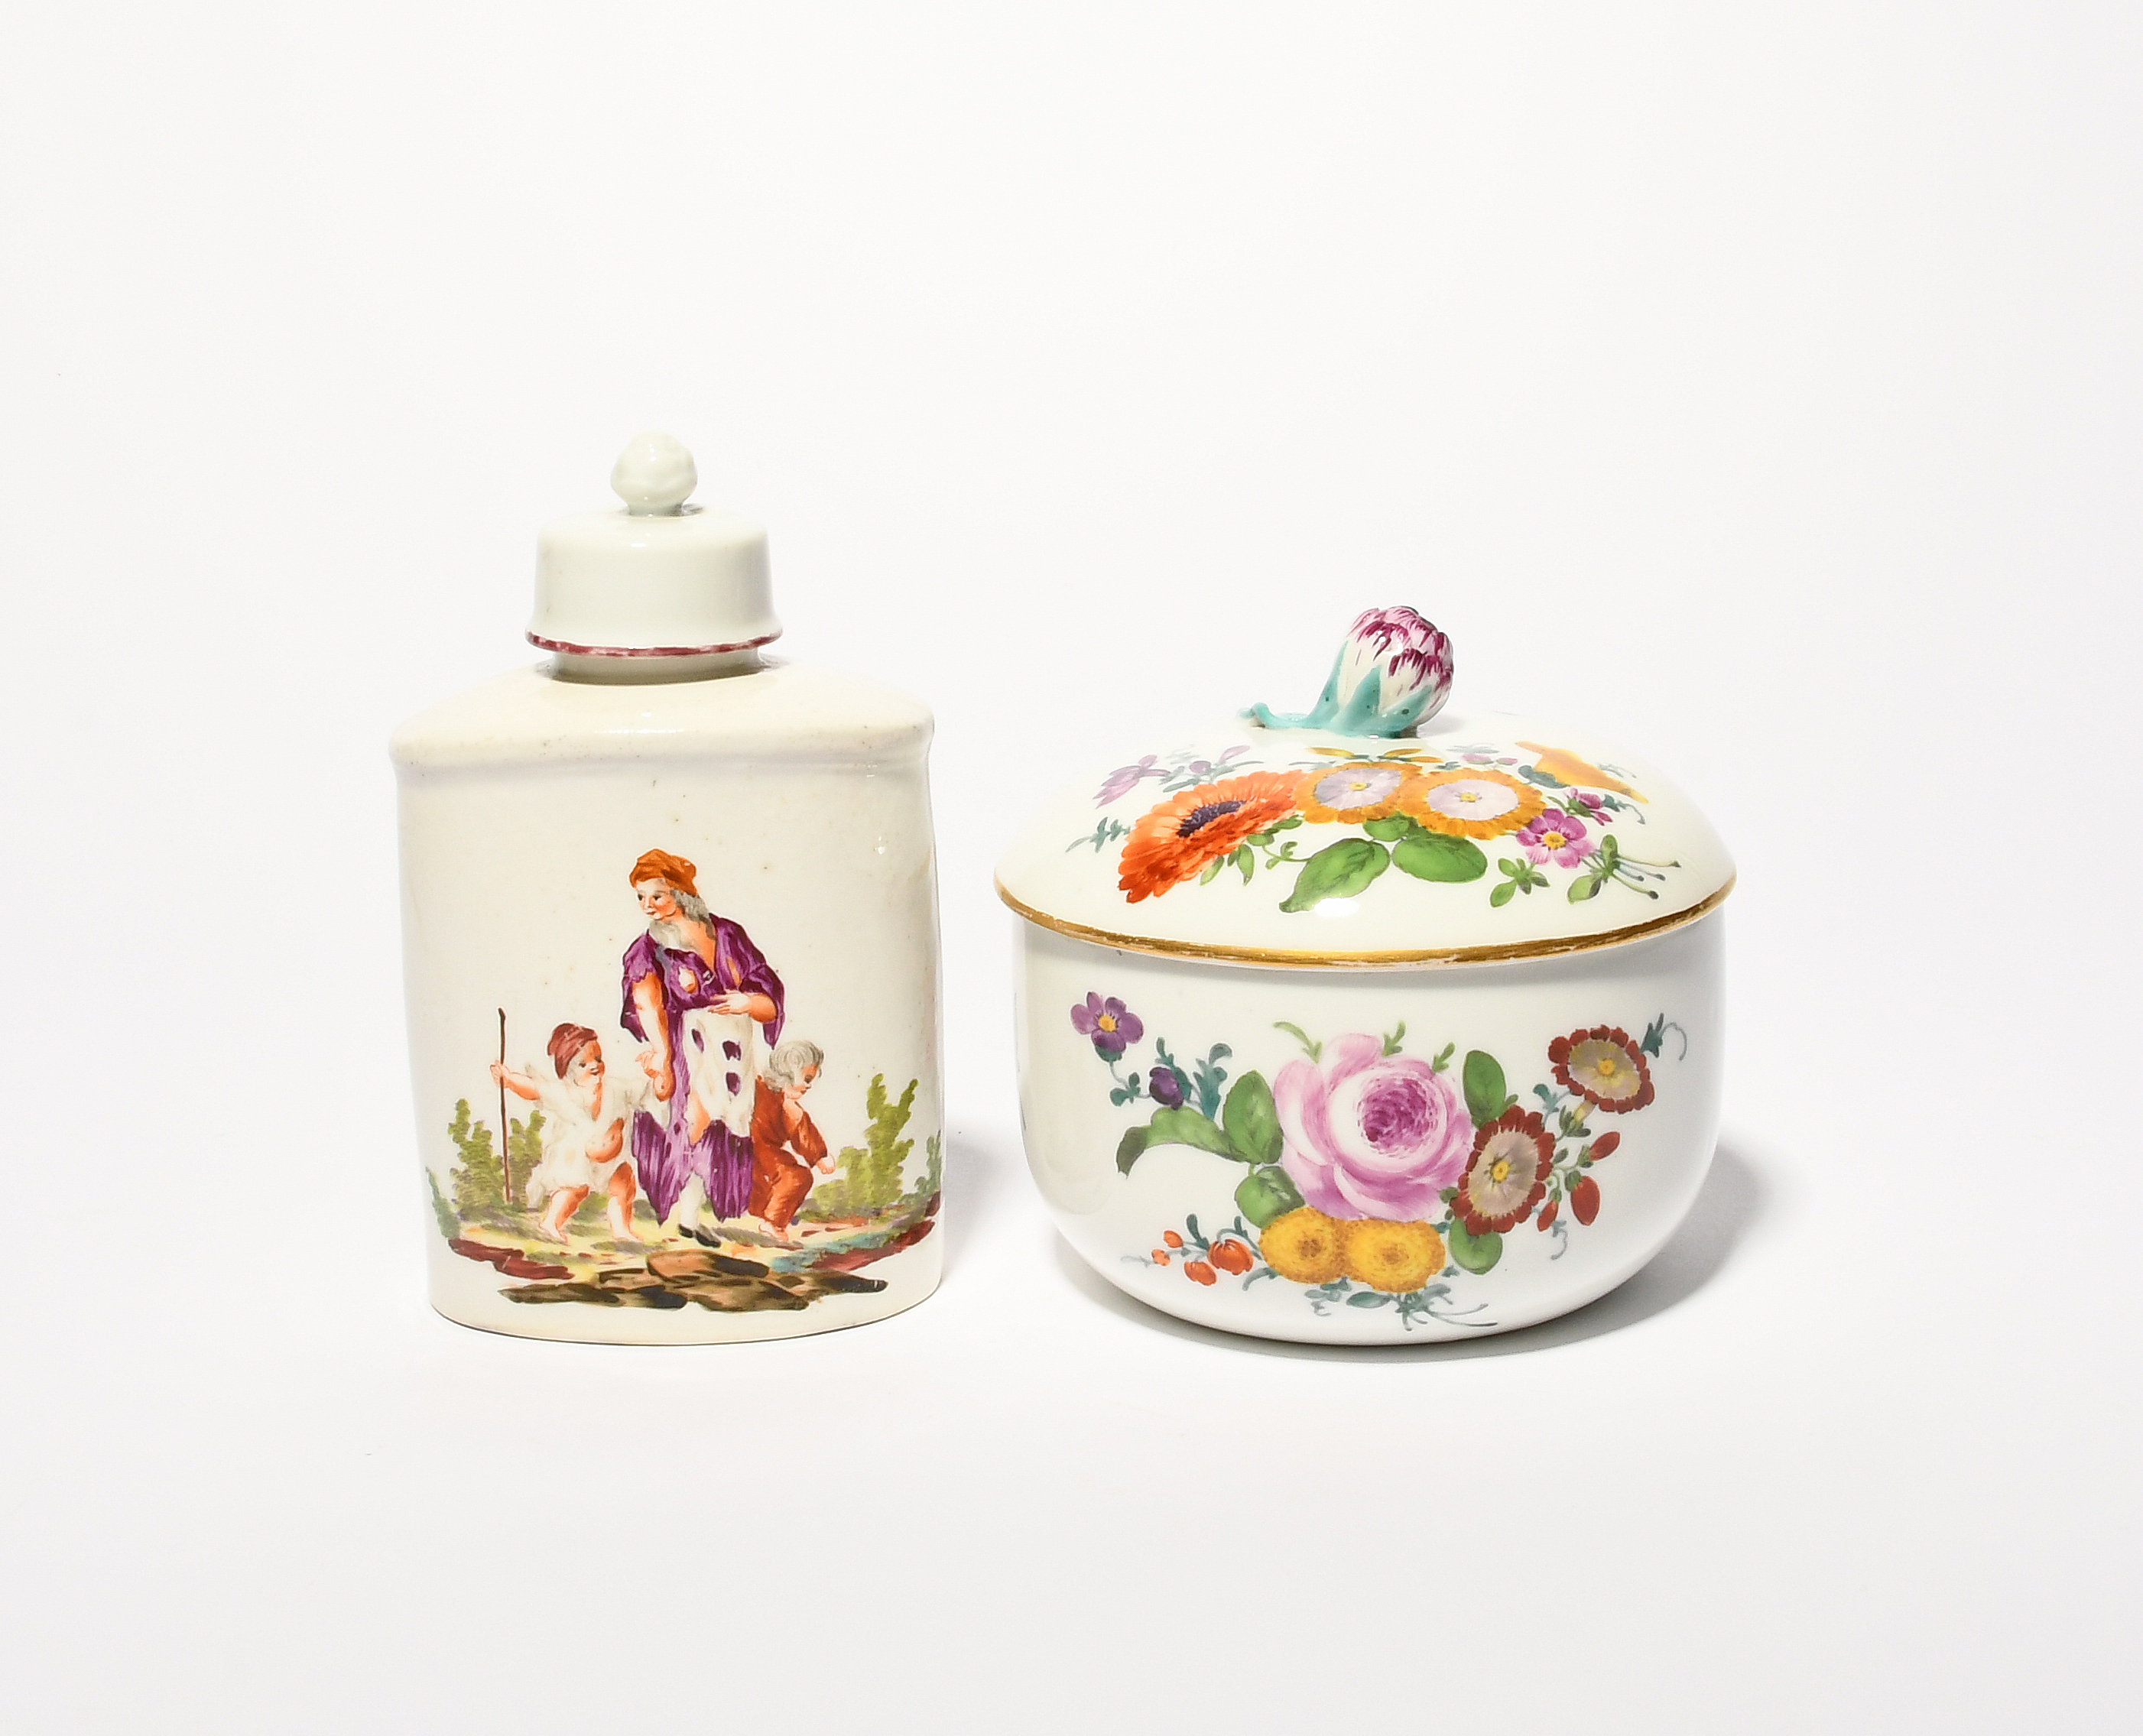 A Limbach tea canister and cover, c.1780, one side painted with a ragged mother and two children, - Image 2 of 2